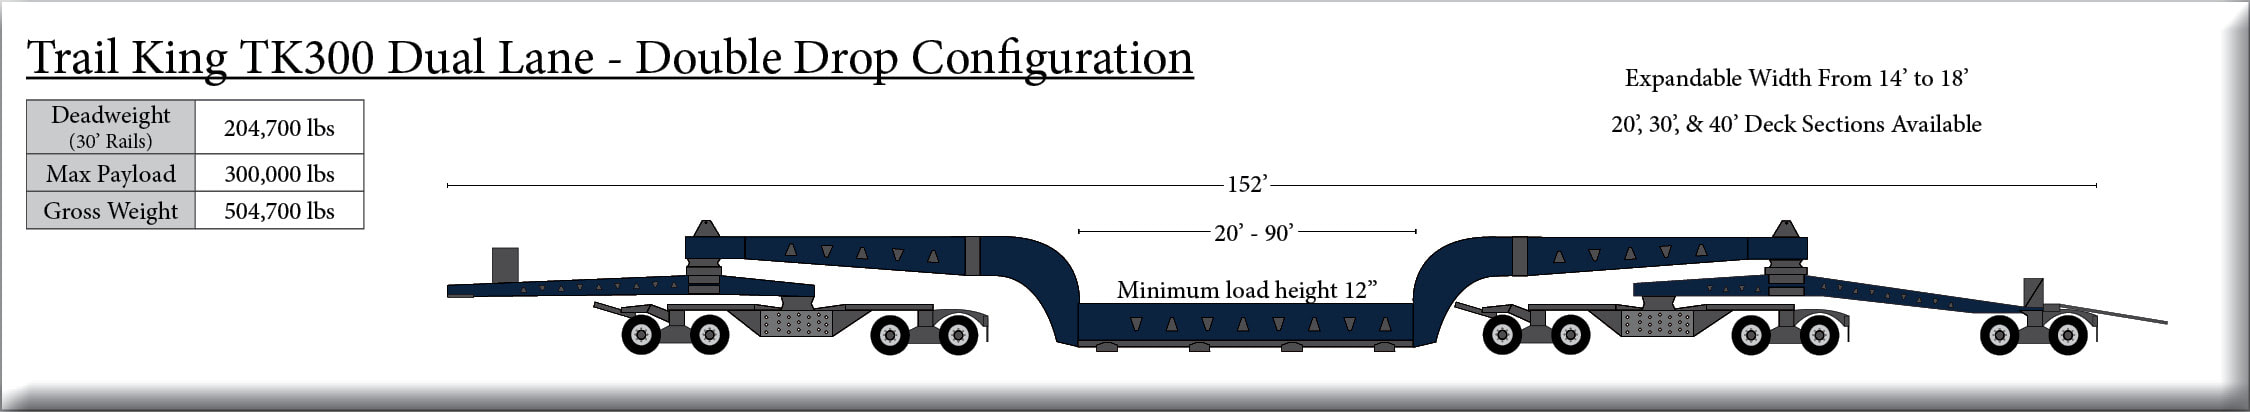 Spec Drawing of Trail King TK300 Dual Lane Trailer, Double Drop Configuration